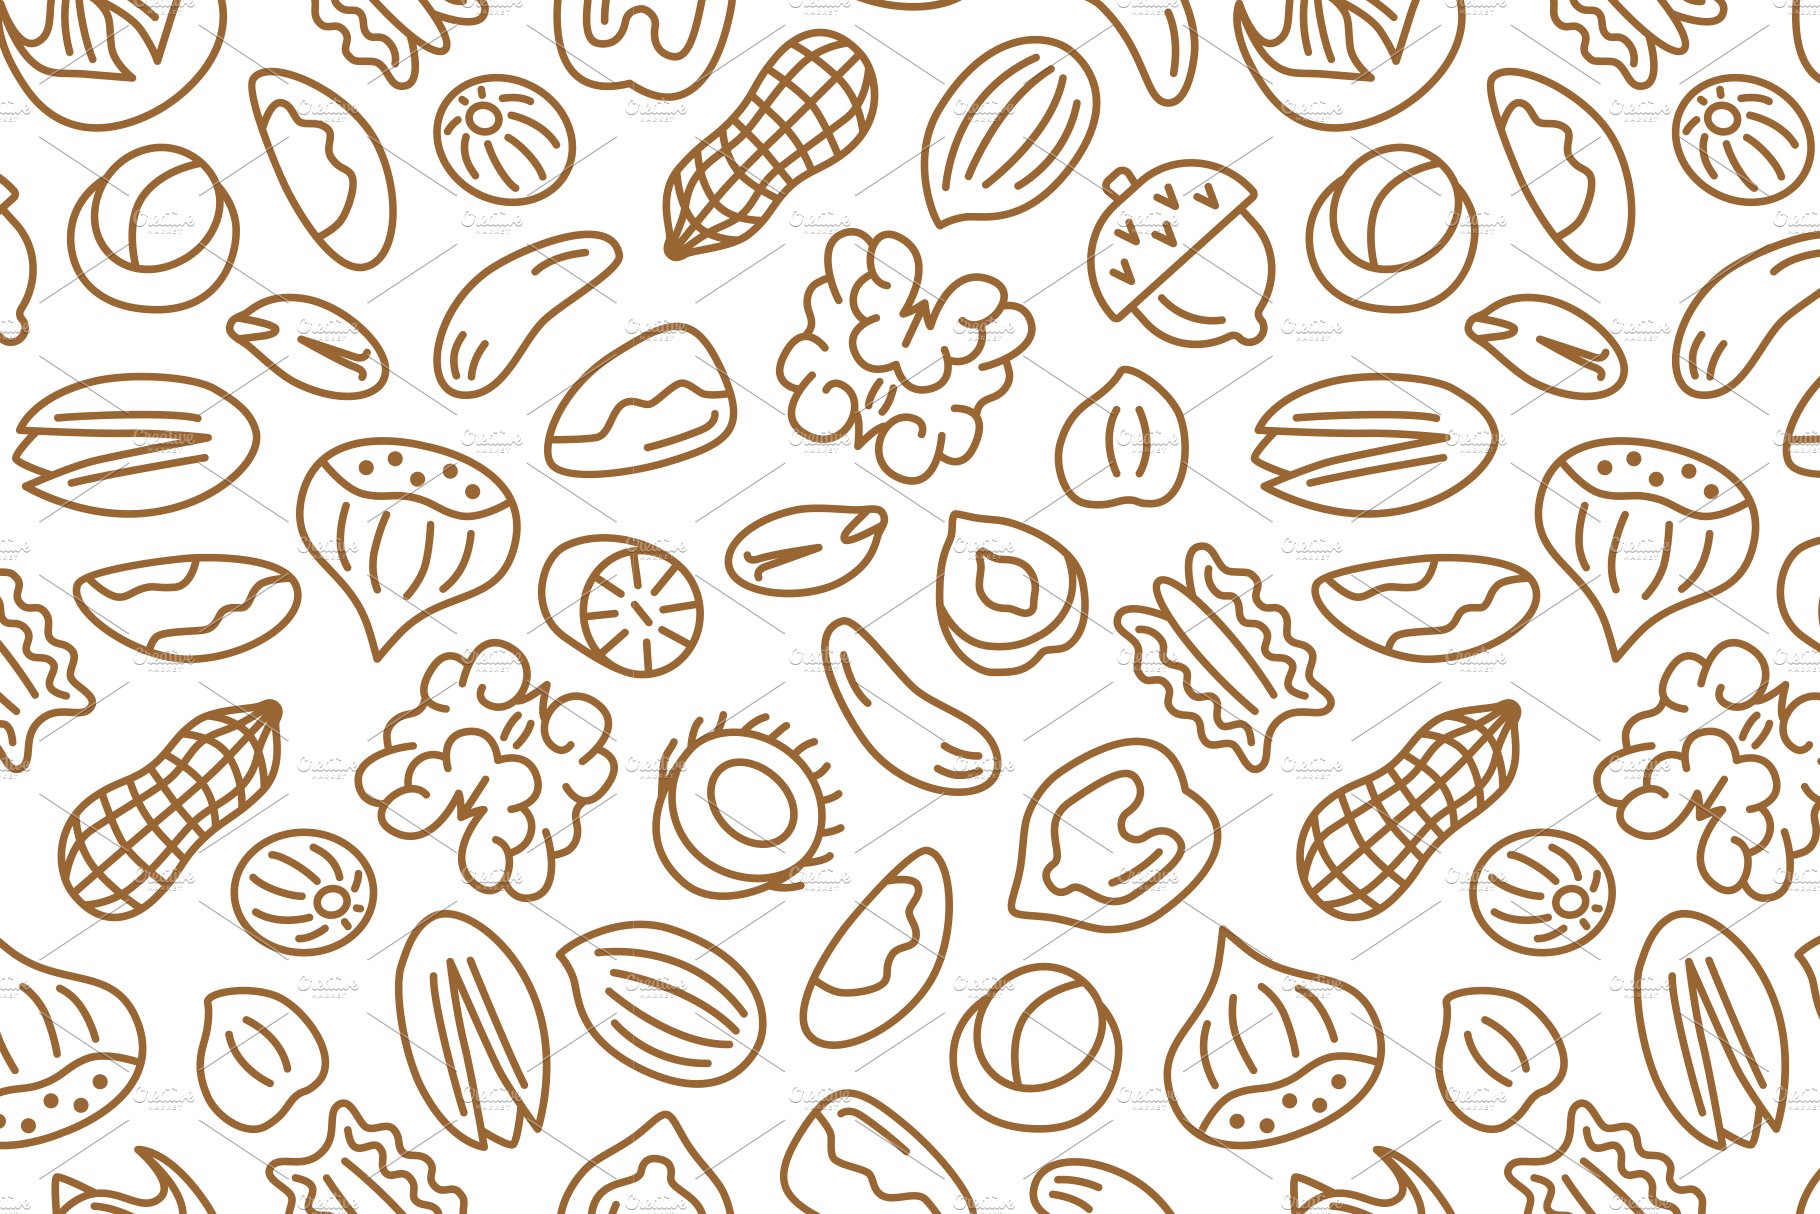 Nut seamless pattern cover image.